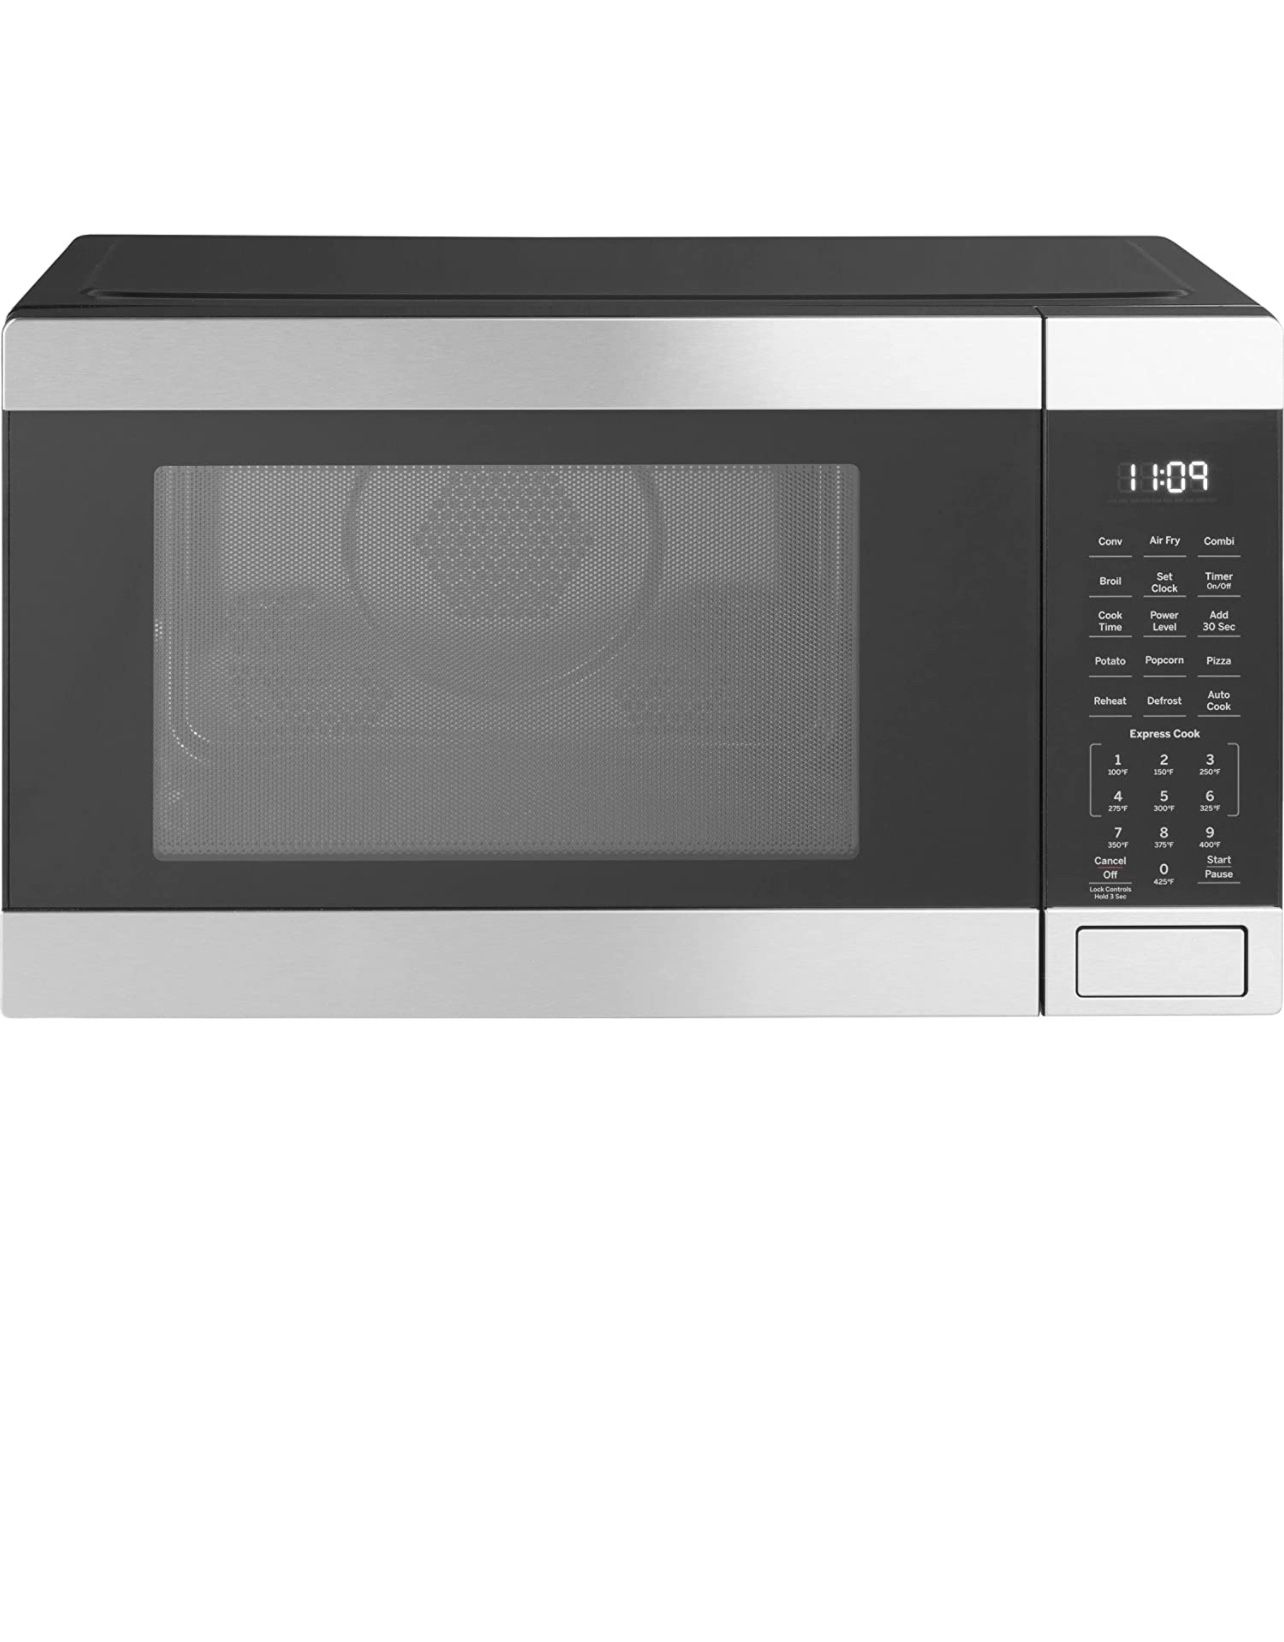 TOSHIBA Hot Air Convection Toaster Oven, Extra Large 34QT/32L, 9-in-1  Cooking Functions, Crispy Grill, Dehydrate, Rotisserie, 6 Accessories  Included